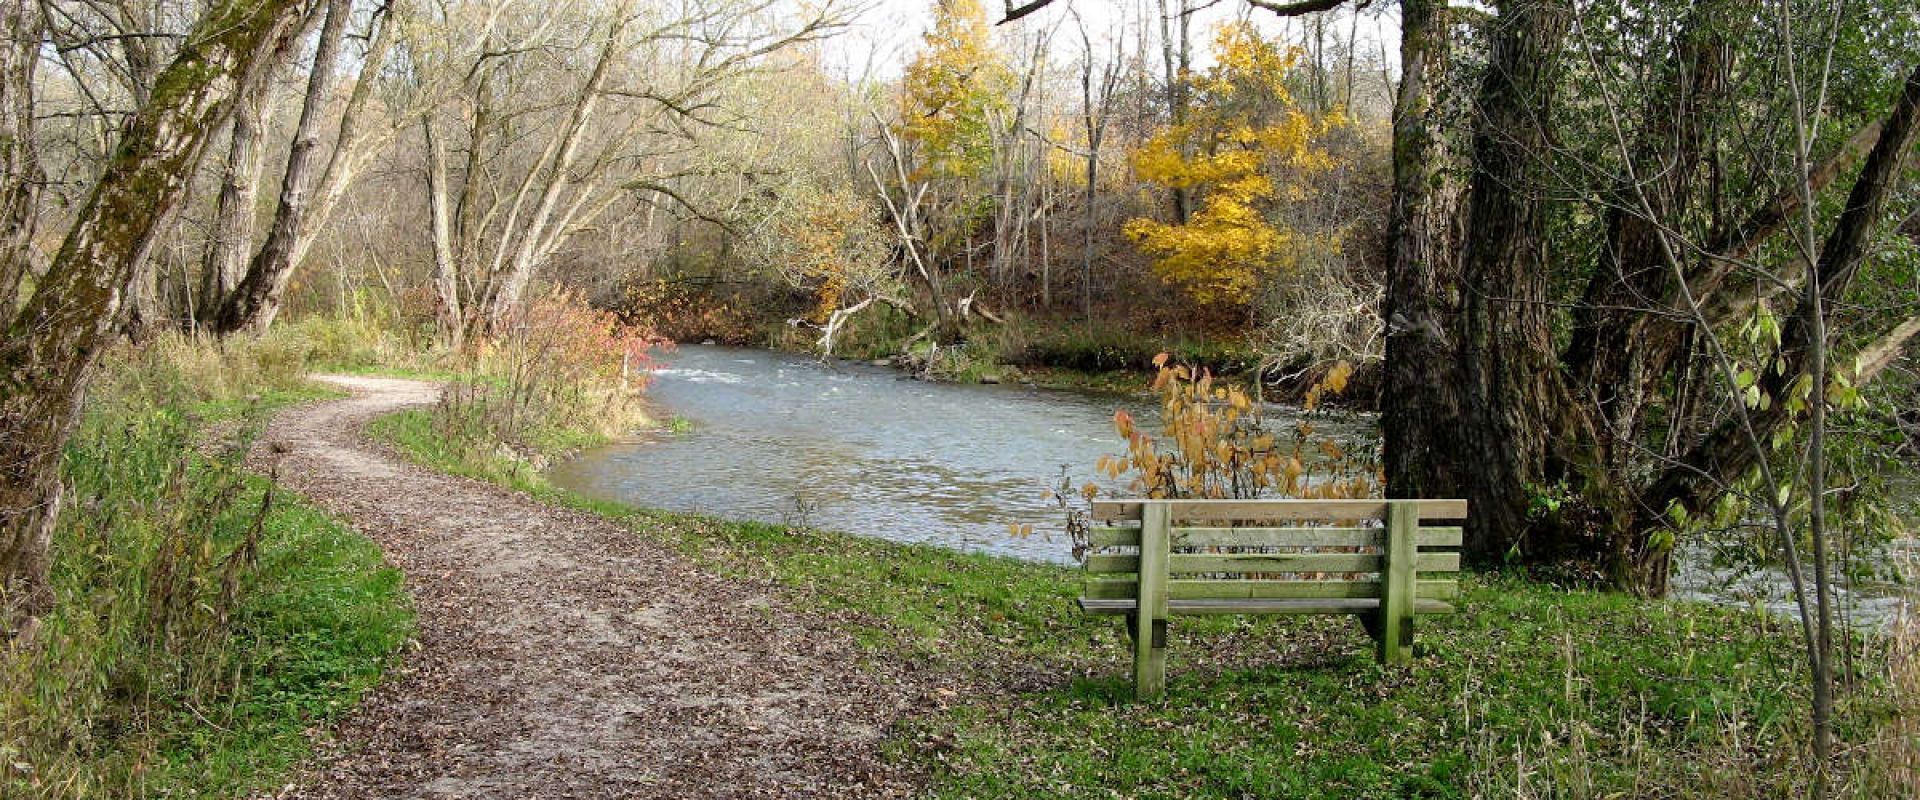 The Woodstock Trail in Burgess Park is a footpath that follows alongside the Thames River. There is a bench pictured for visitors to sit and admire the river.